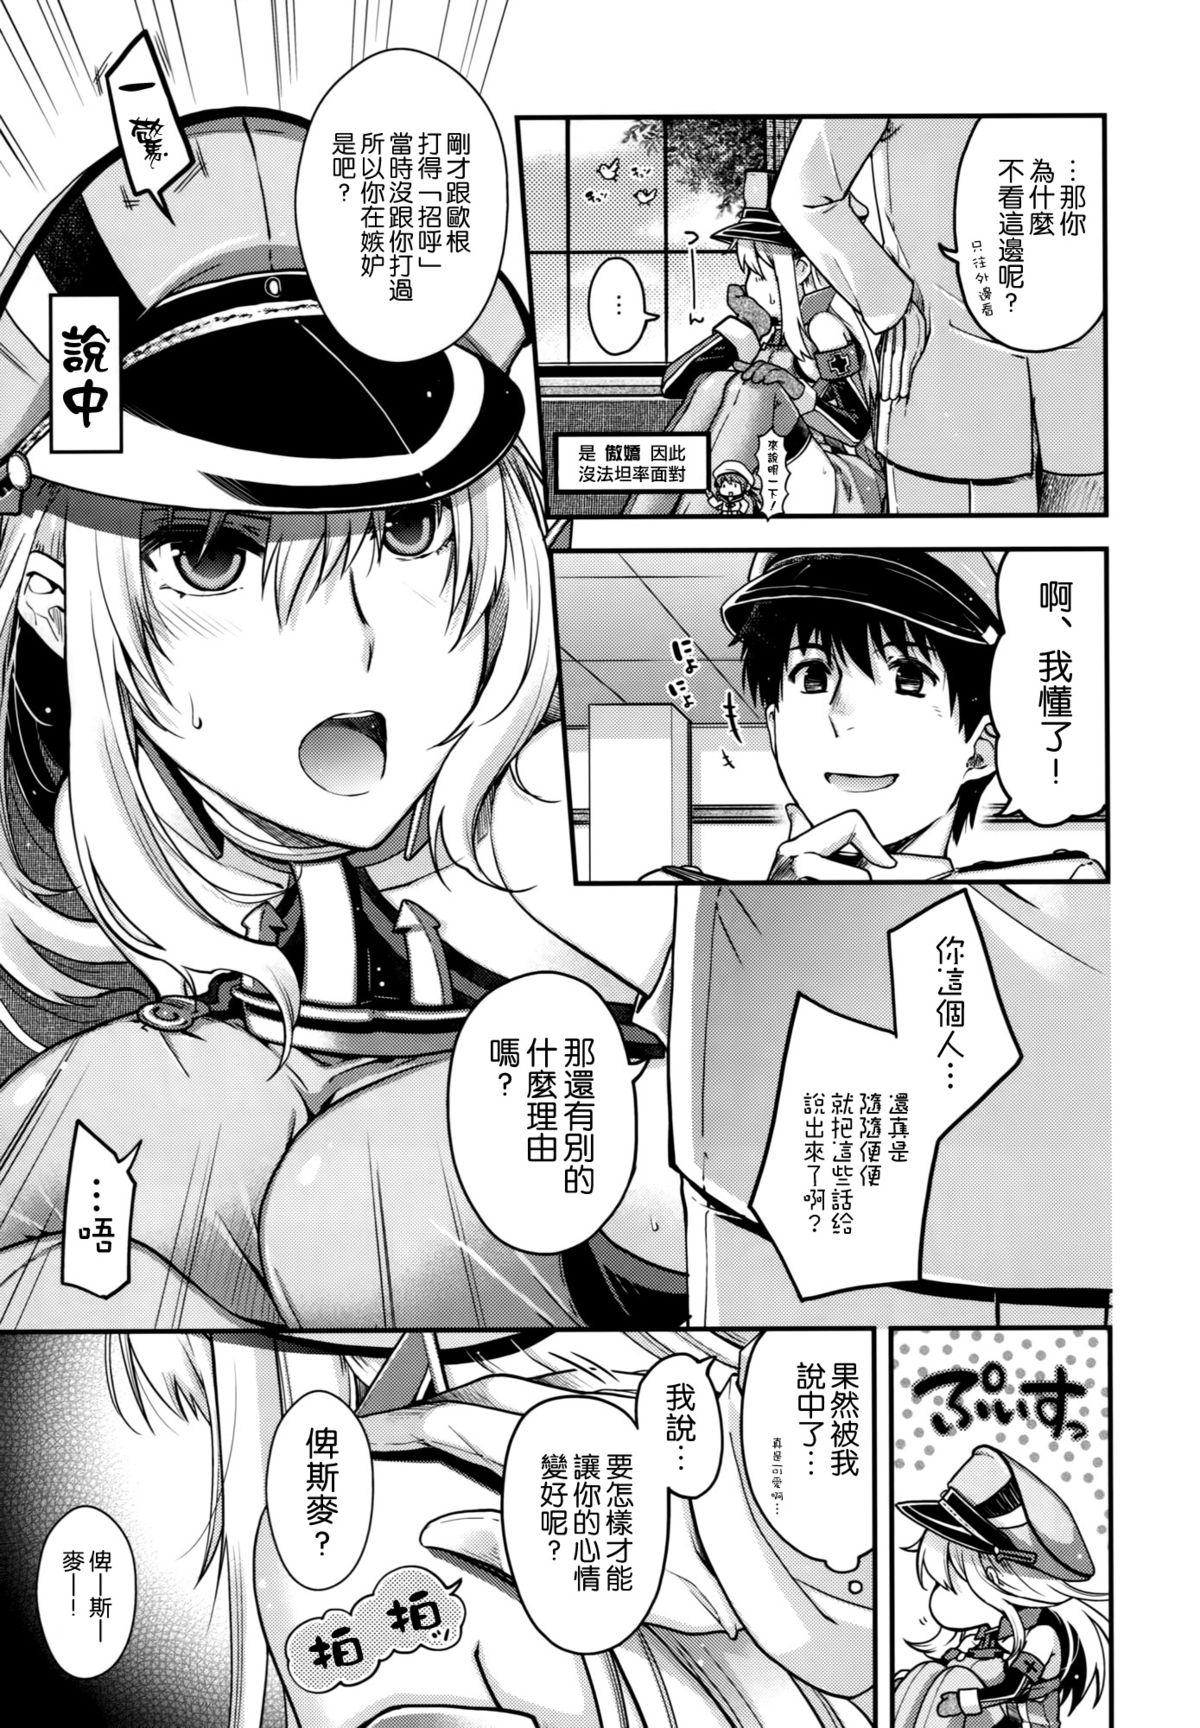 Dancing Admiral! - Kantai collection Blowjob Contest - Page 7